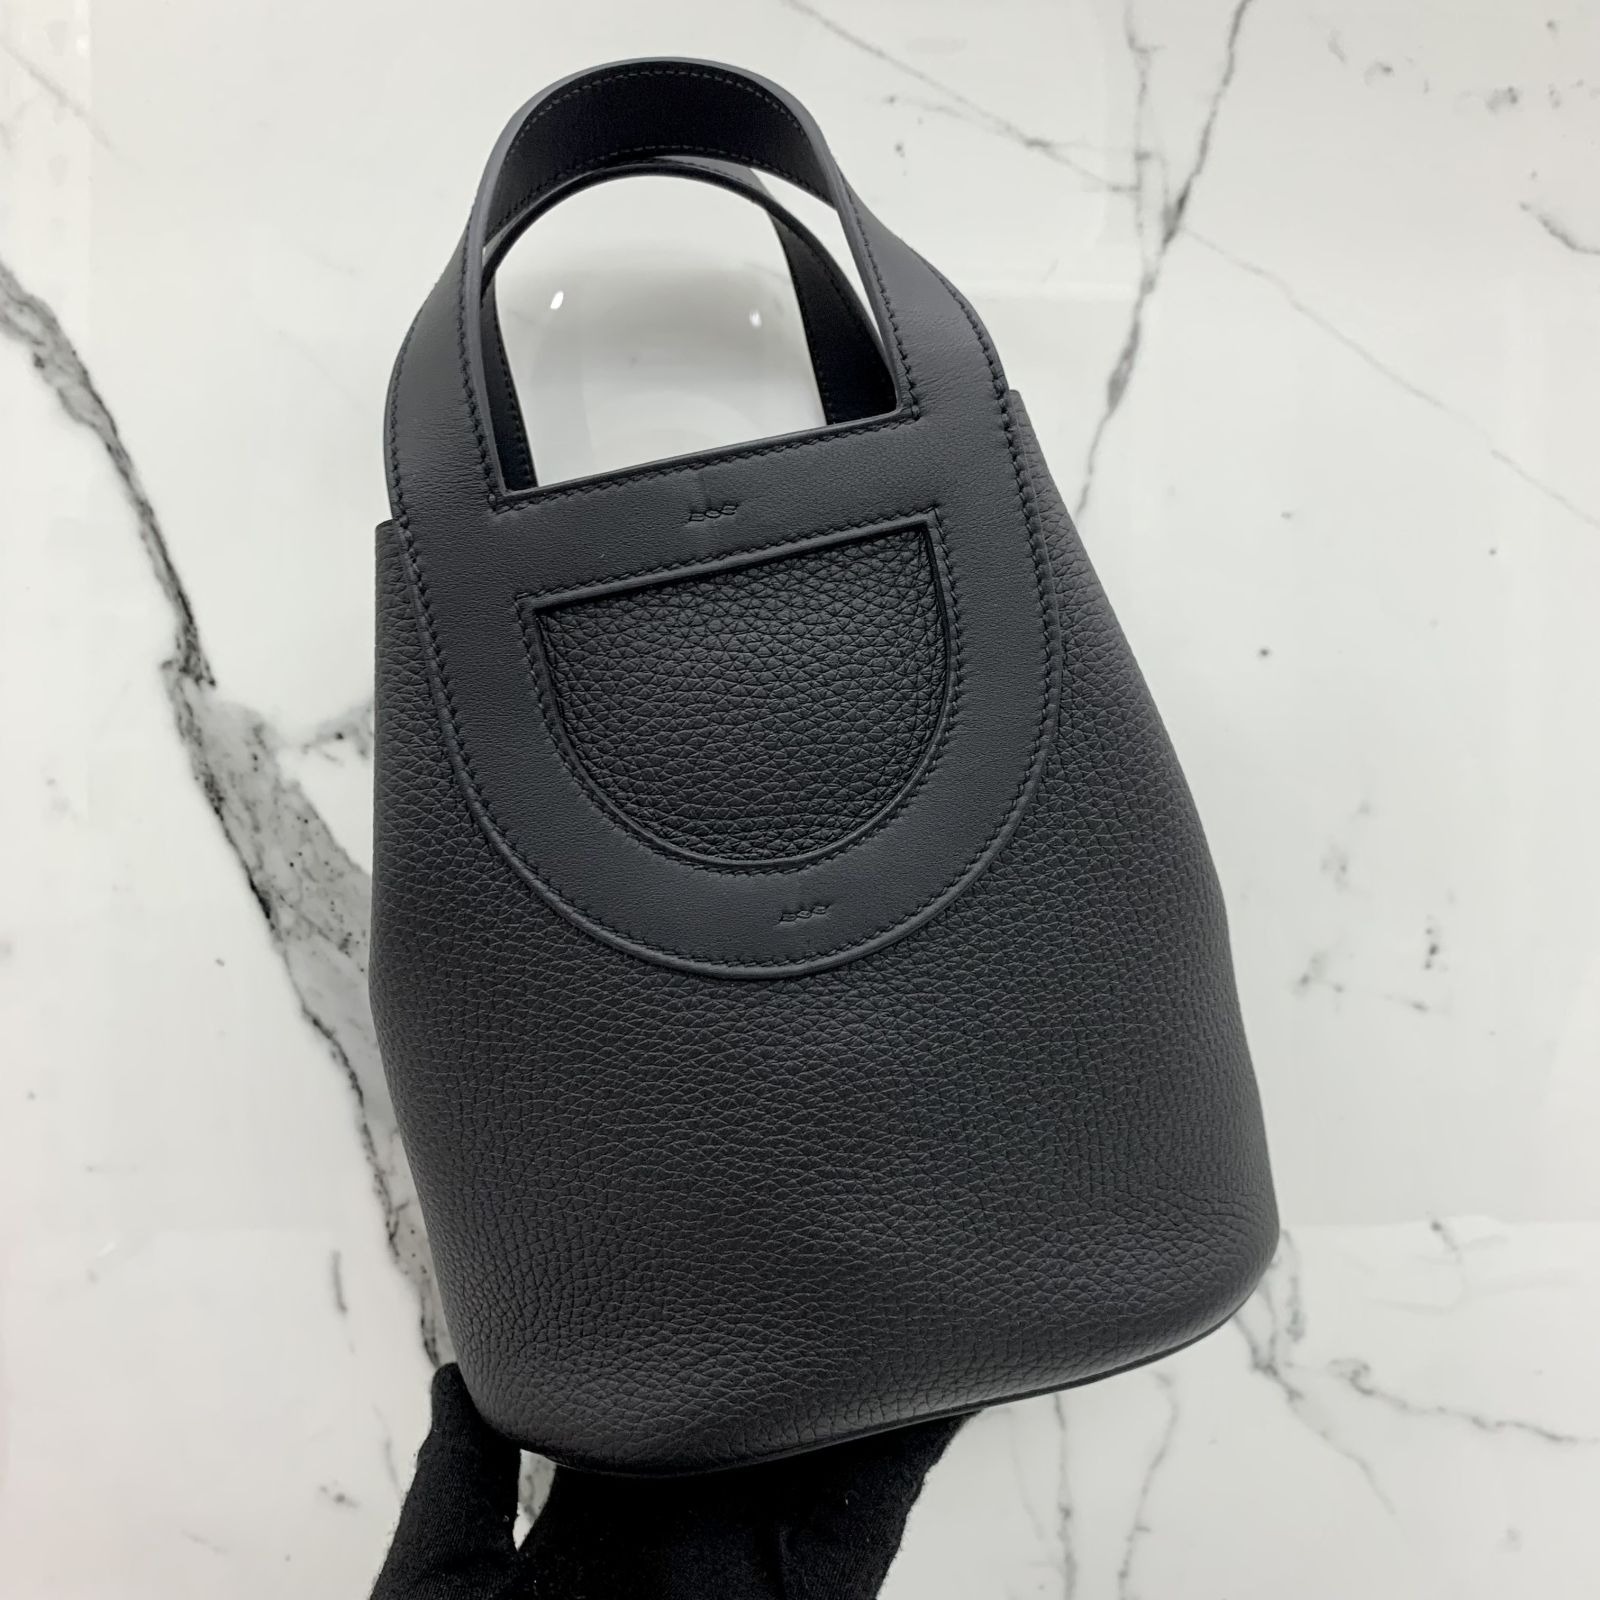 What do you of this new bag from Hermes? 🤩 In the Loop size 18